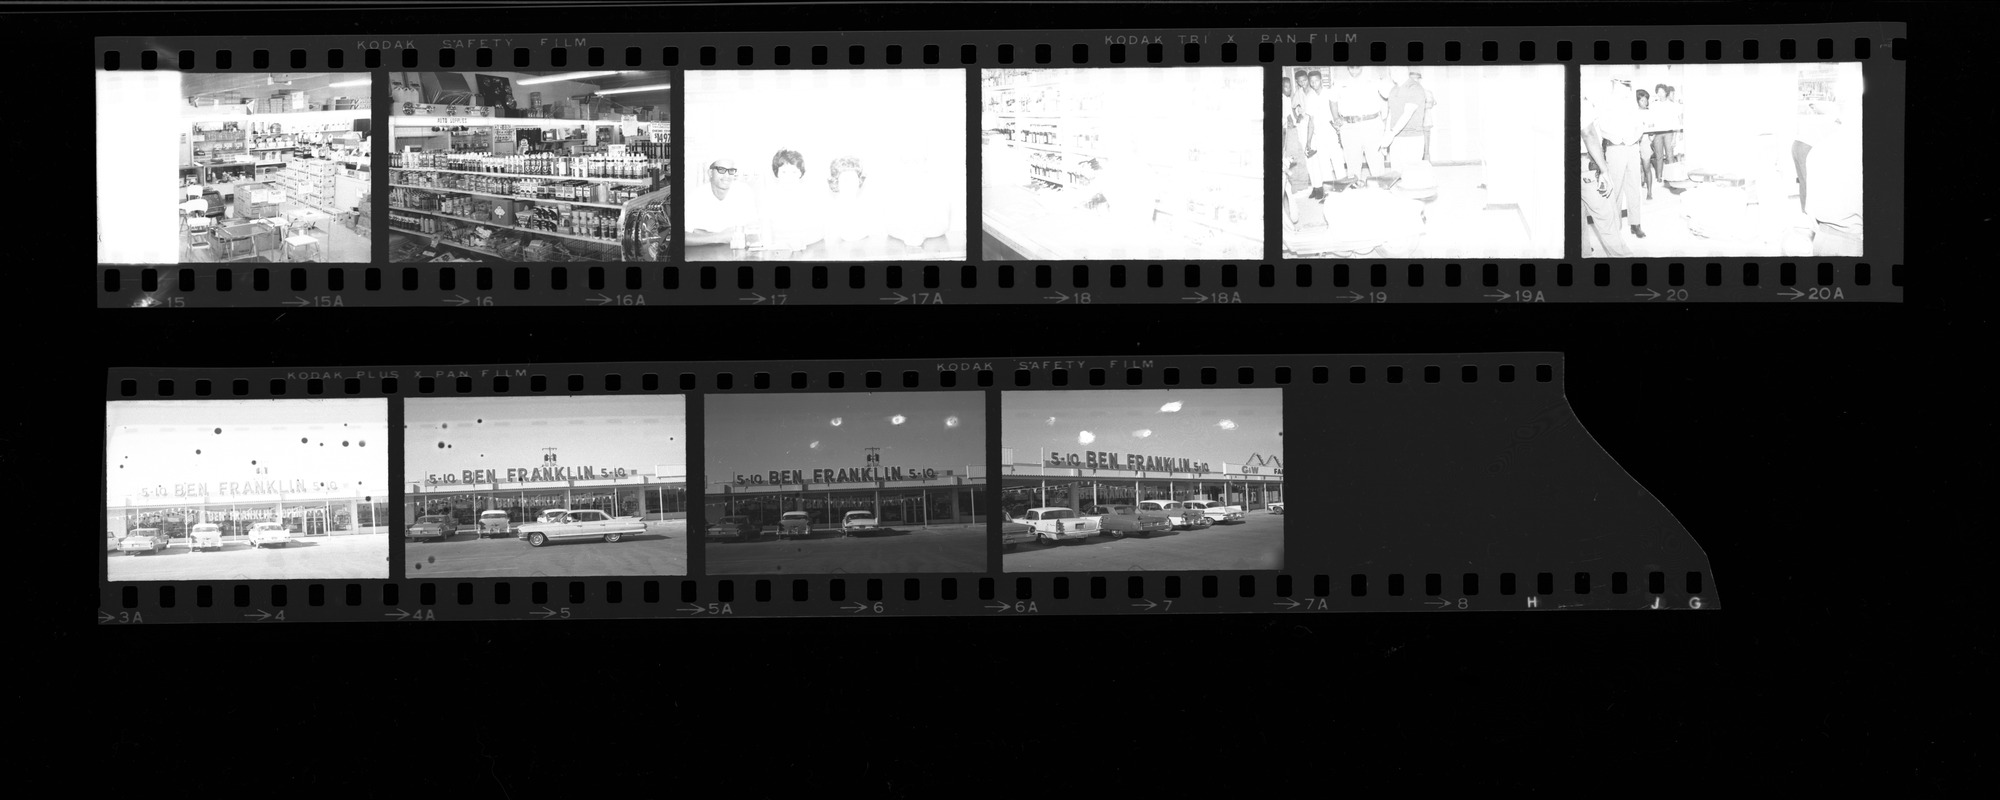 Wright negatives including a church, Golden Western shopping center, portraits, and Merit Drug baseball team, 1964, page 4